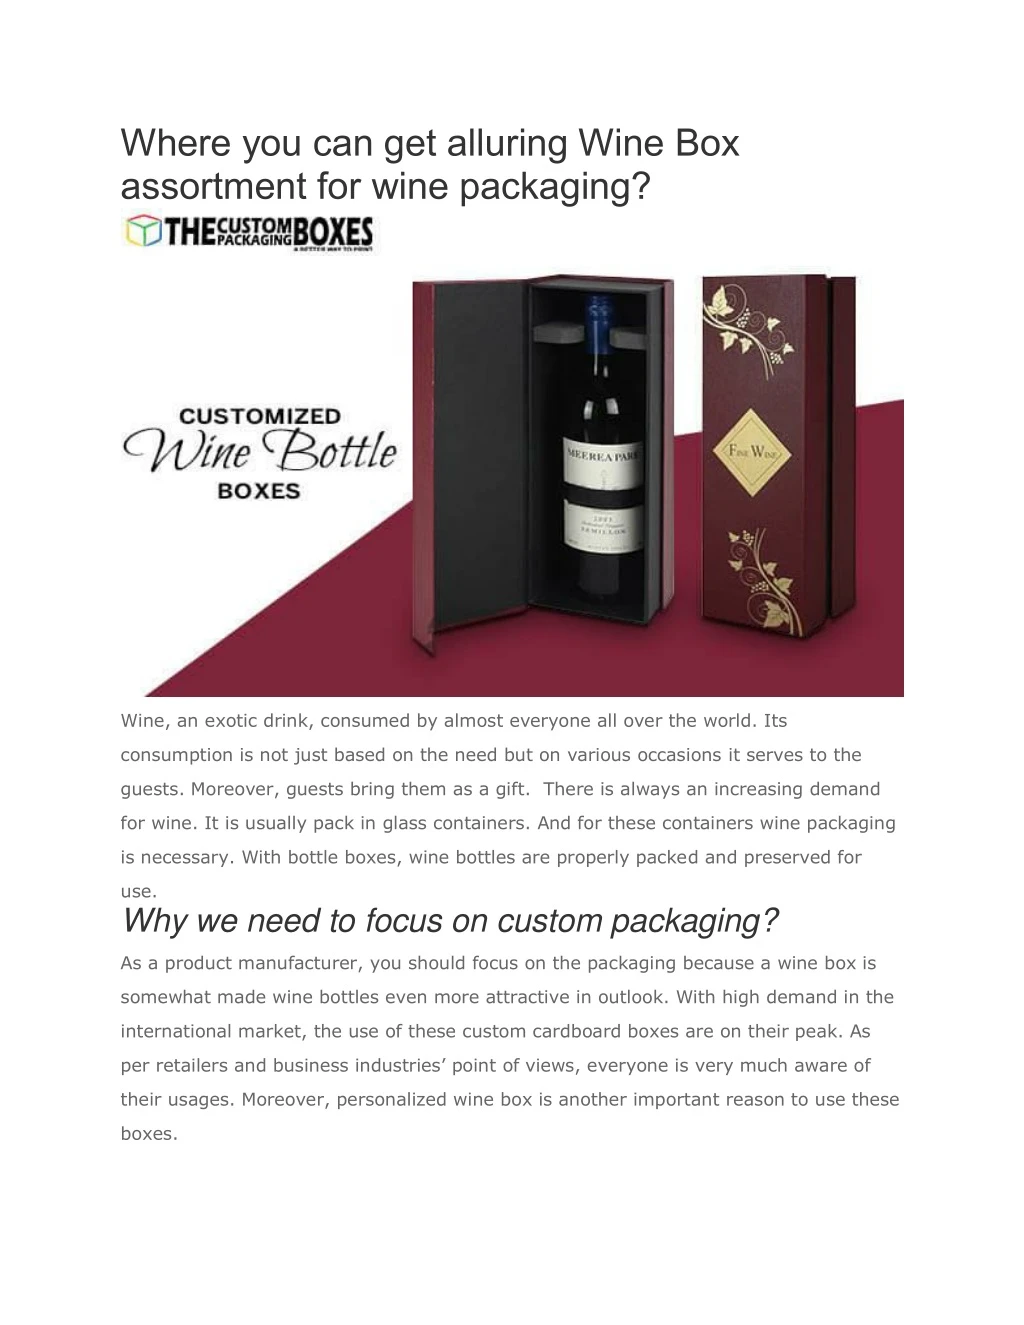 where you can get alluring wine box assortment n.